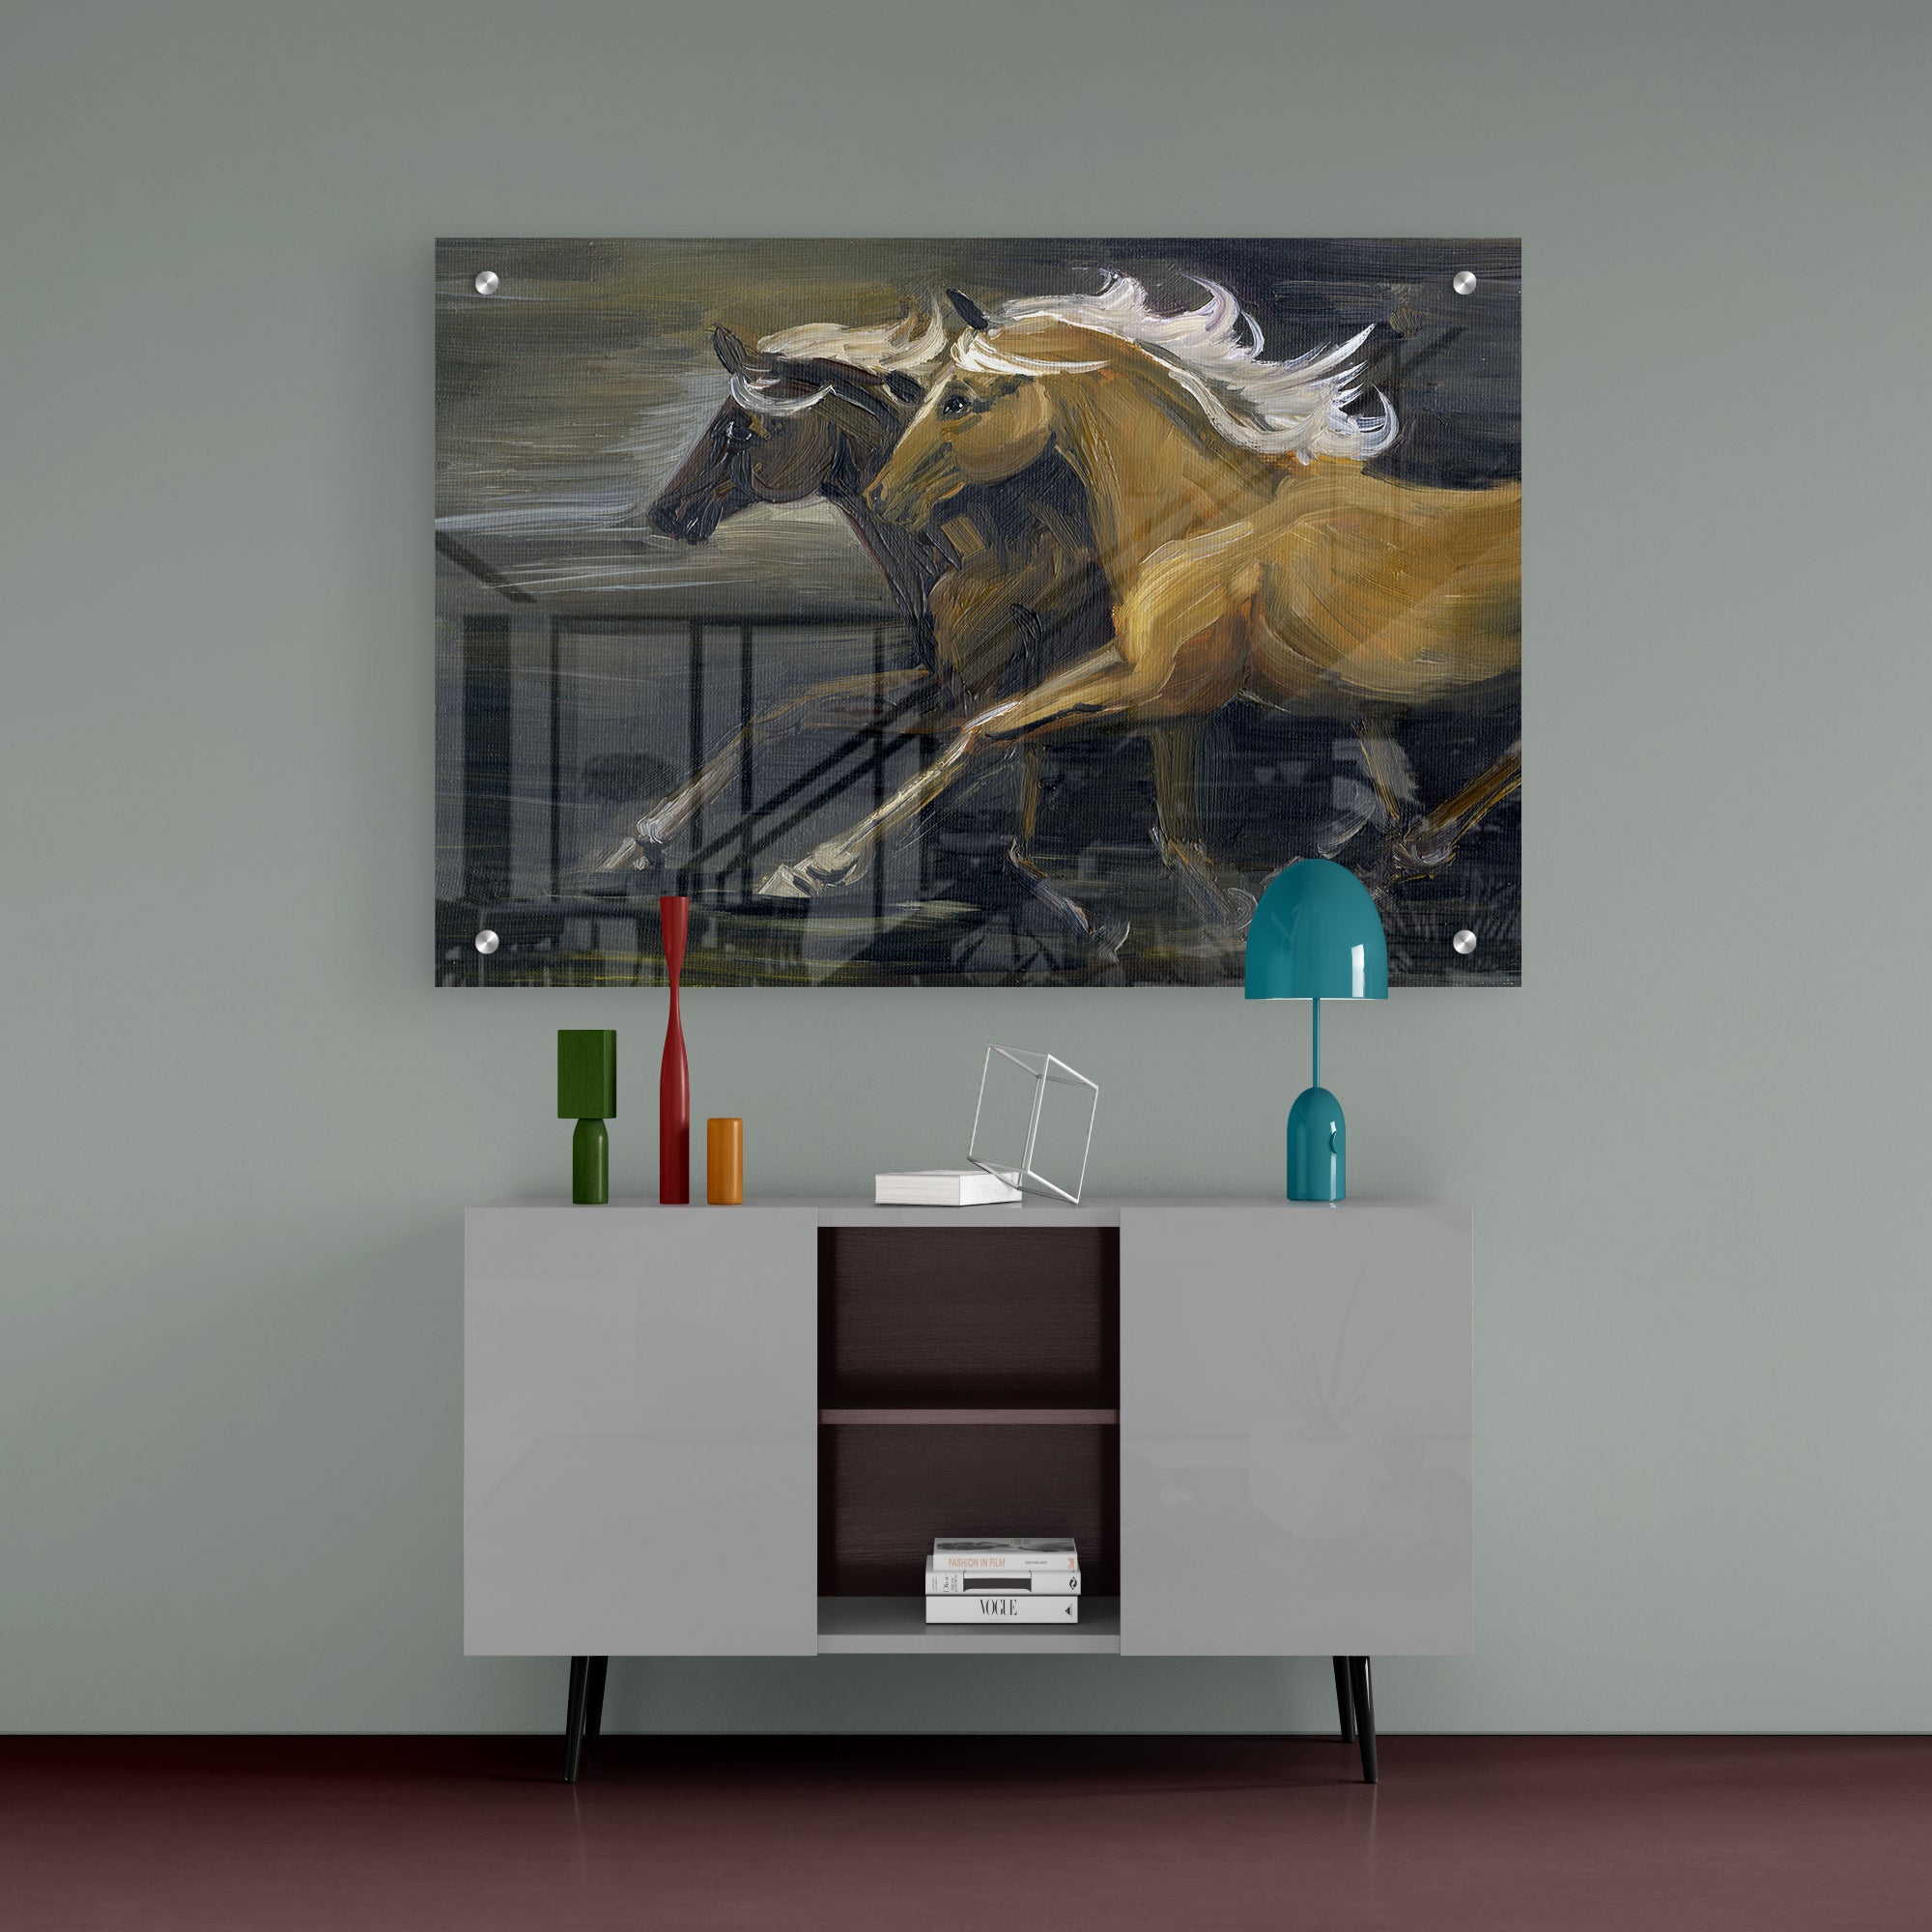 Abstract Two Runging Horses Modern Art Acrylic Wall Painting